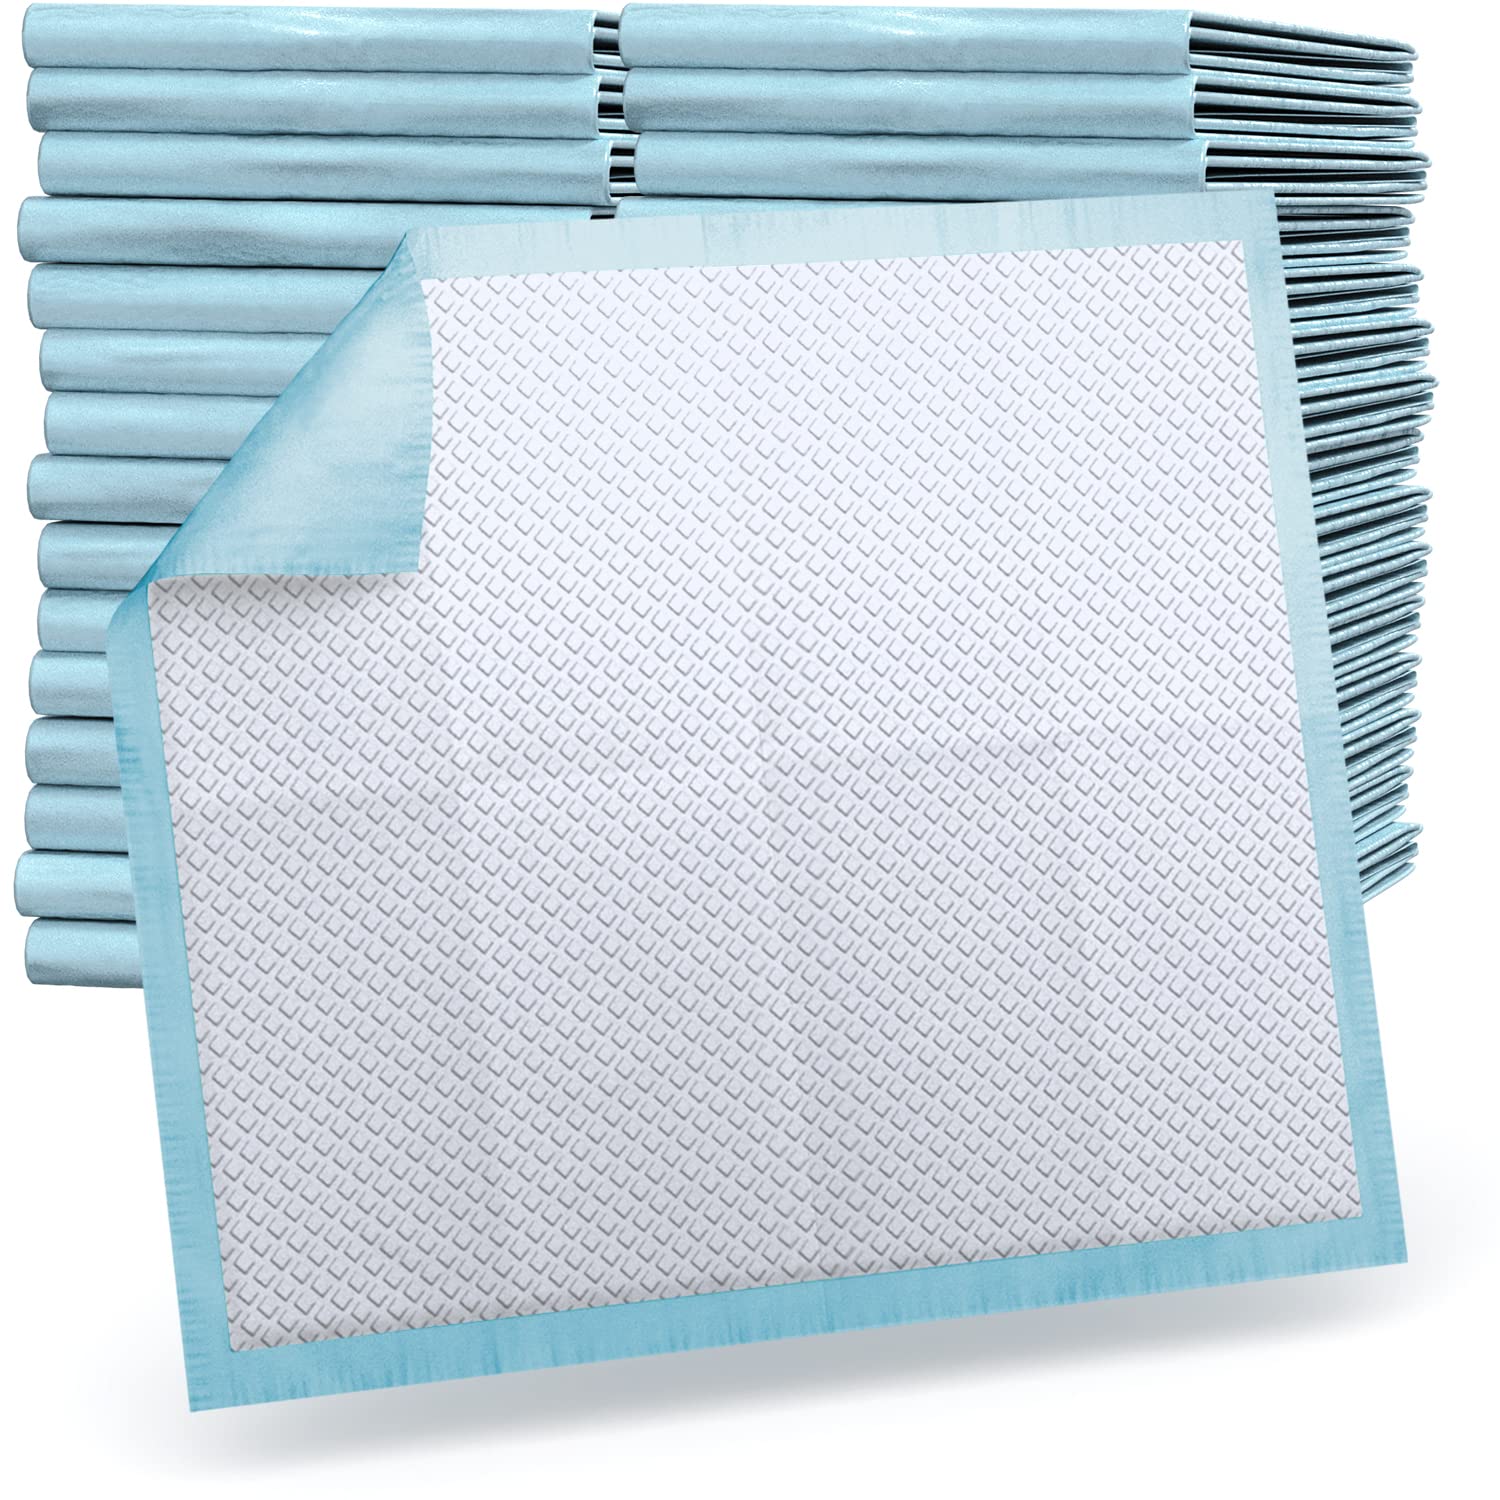 50 x Pulp Quilted 36” x 36” Disposable Incontinence Underpads  High  Absorbency Waterproof Protective Bed Pads for Mattress, Sofa & Chair for  Babies, Children, Adults, & Elderly 50 Pack